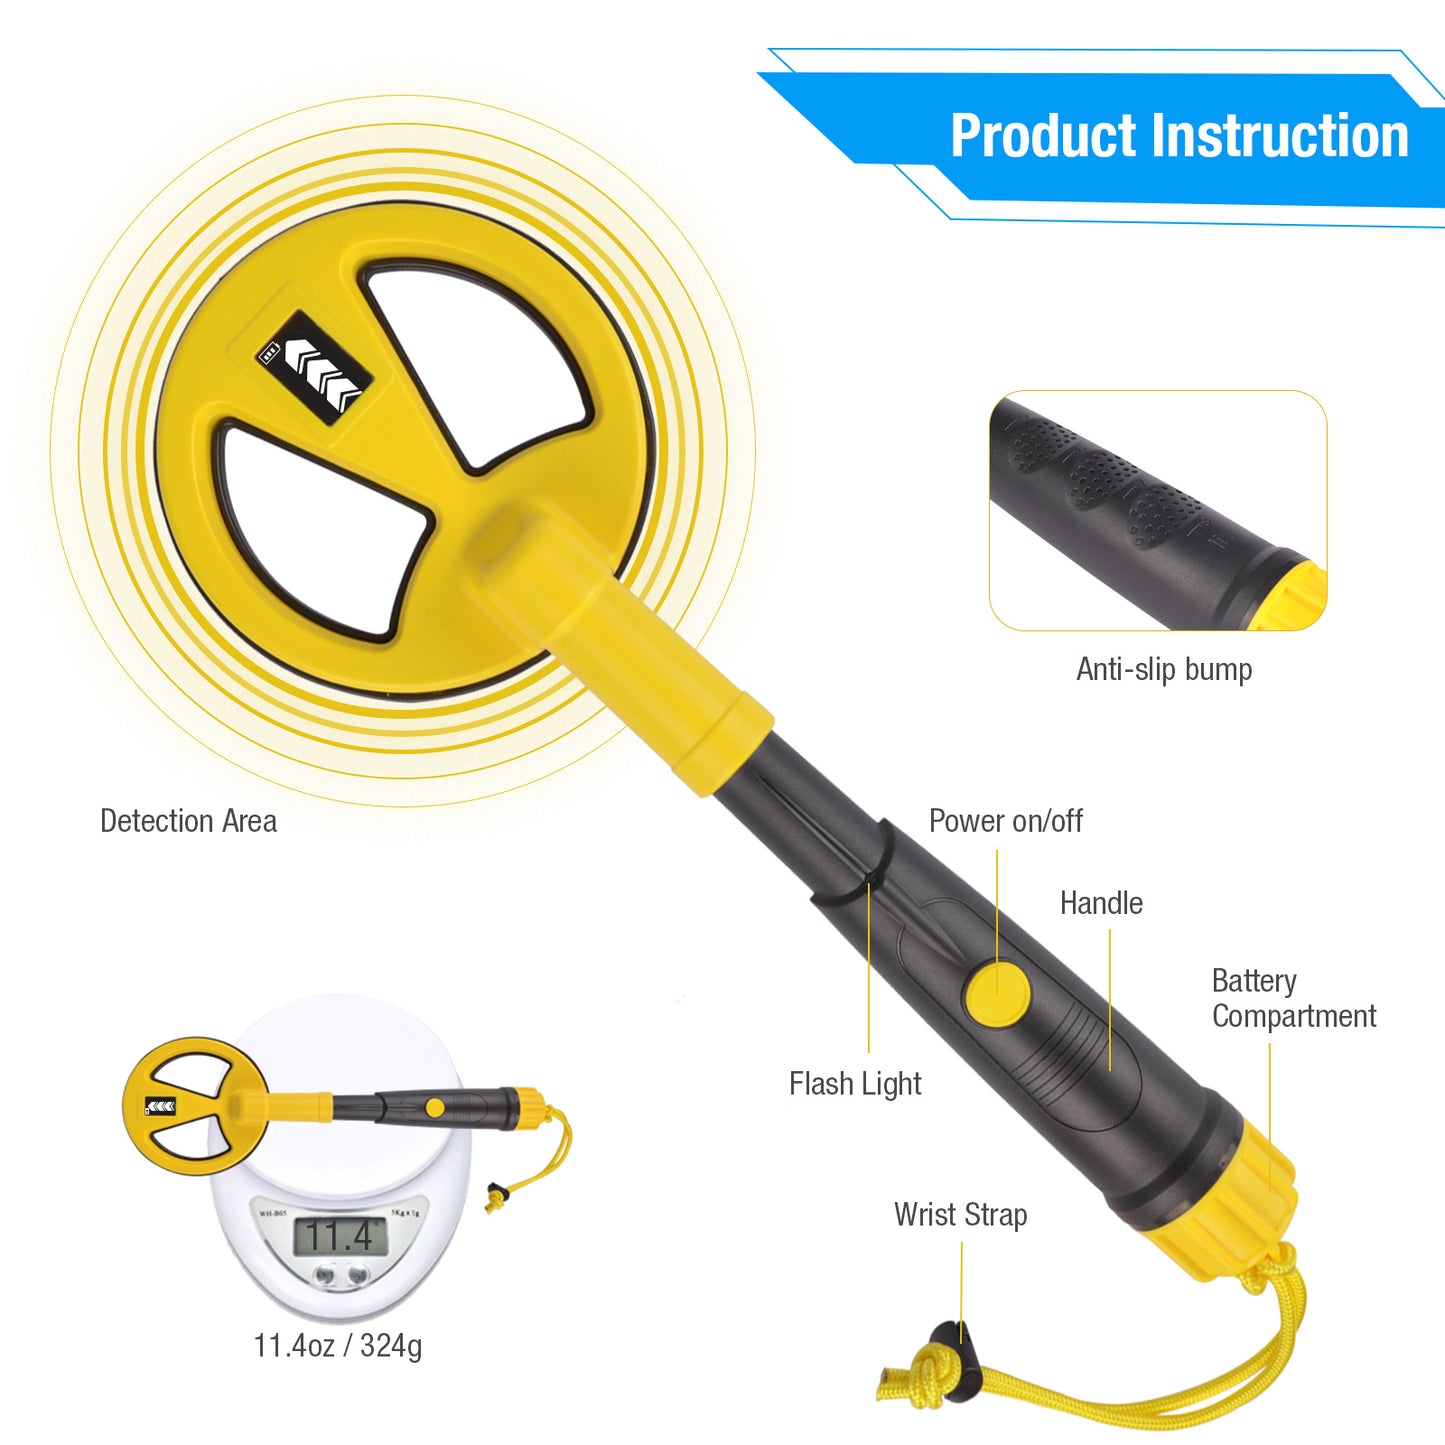 Fully Waterproof Underwater Metal Detector for Kids and Adults Mini Handheld Pinpointer Probe Pulse Induction with LED and Power Indicator MD 790